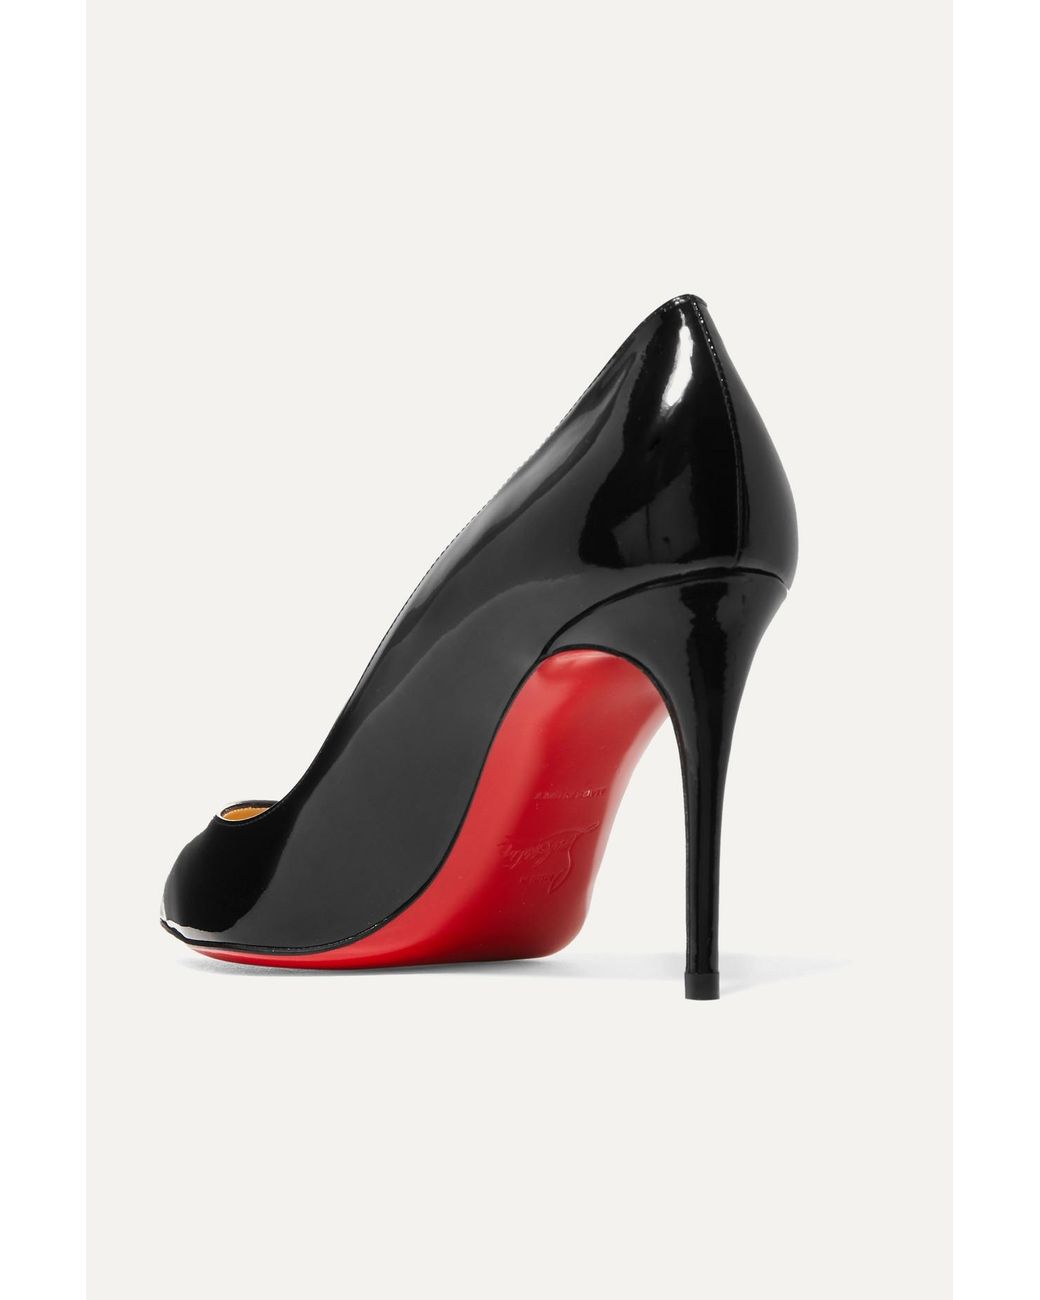 Christian Louboutin Pigalle Follies 85 Patent-leather Pumps in Black | Lyst